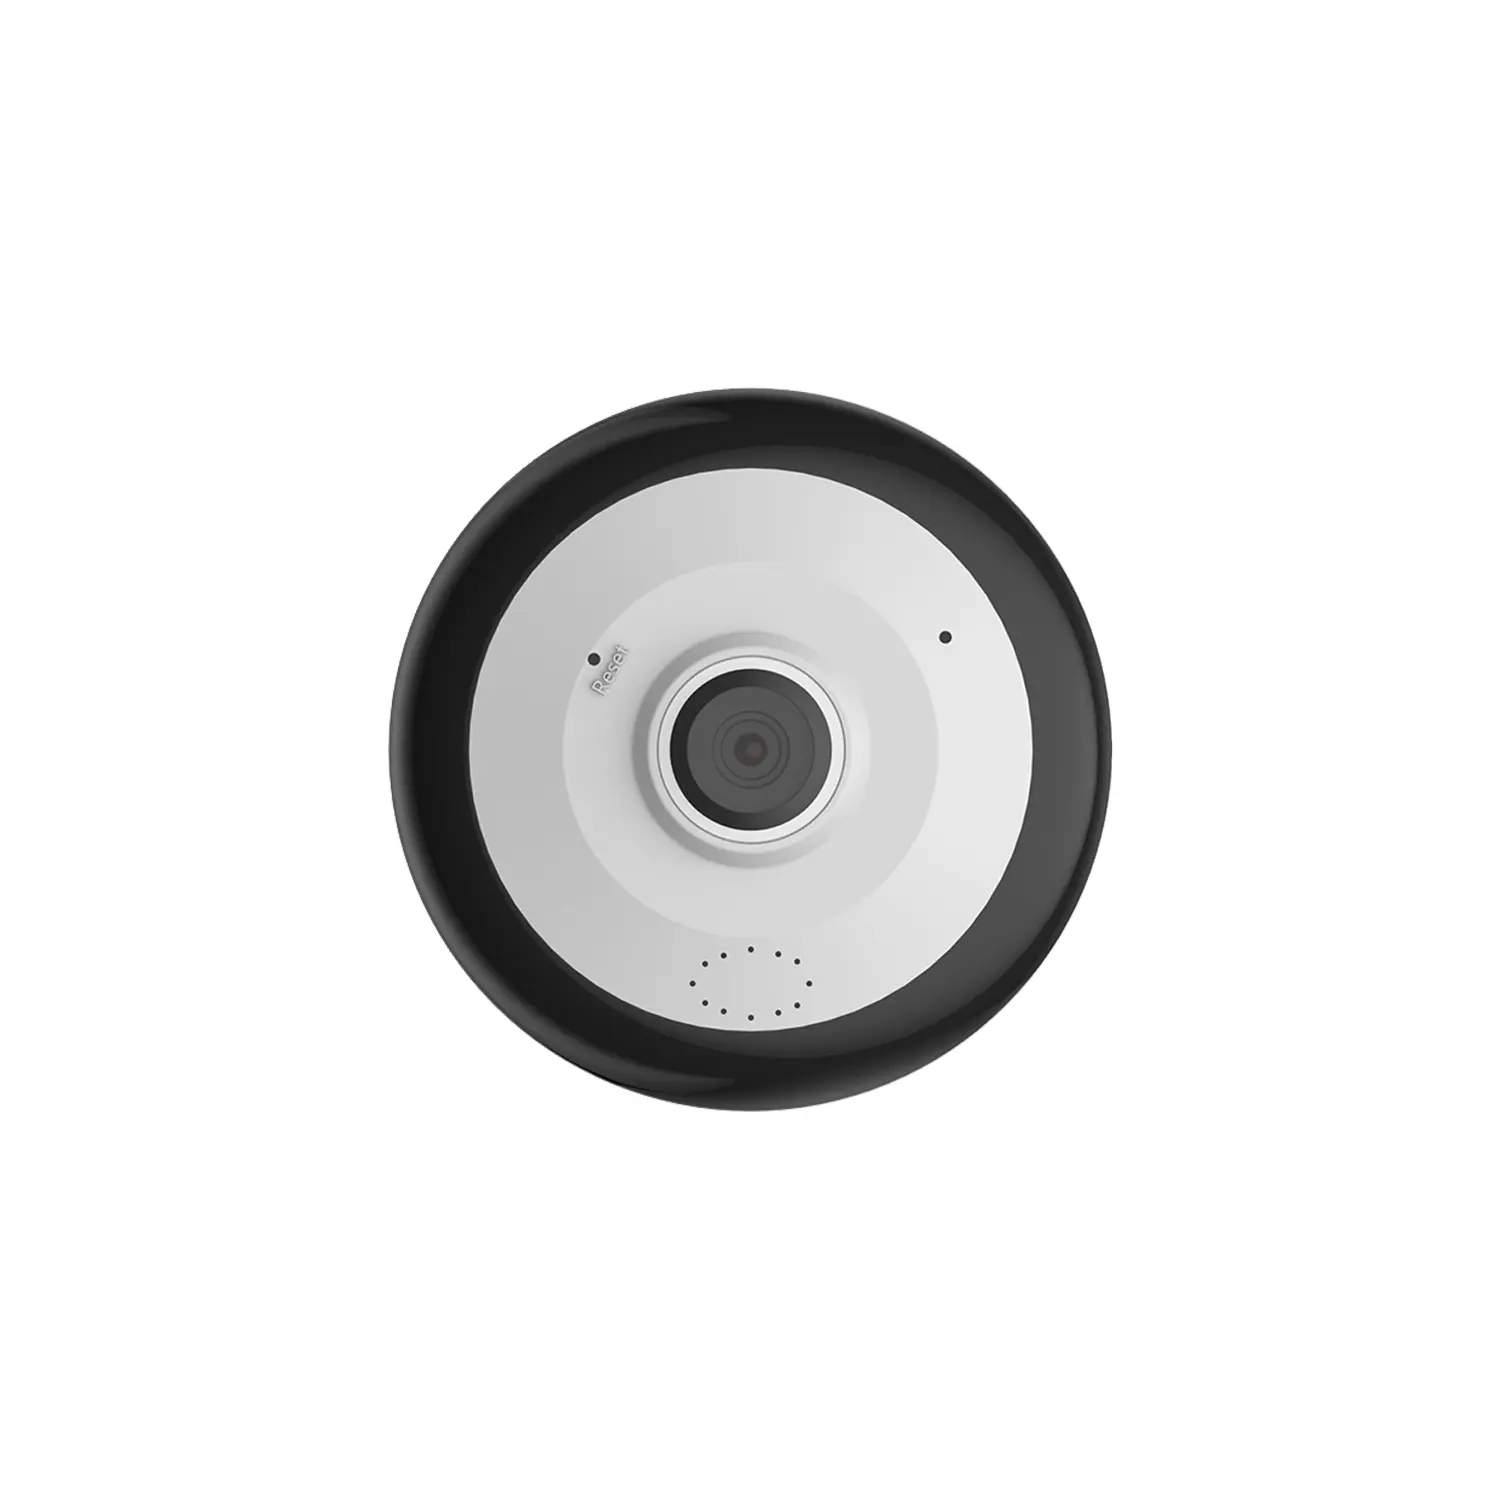 Built In Omnidirectional Noise Reduction Microphone And Speaker Panoramic Surveillance Camera